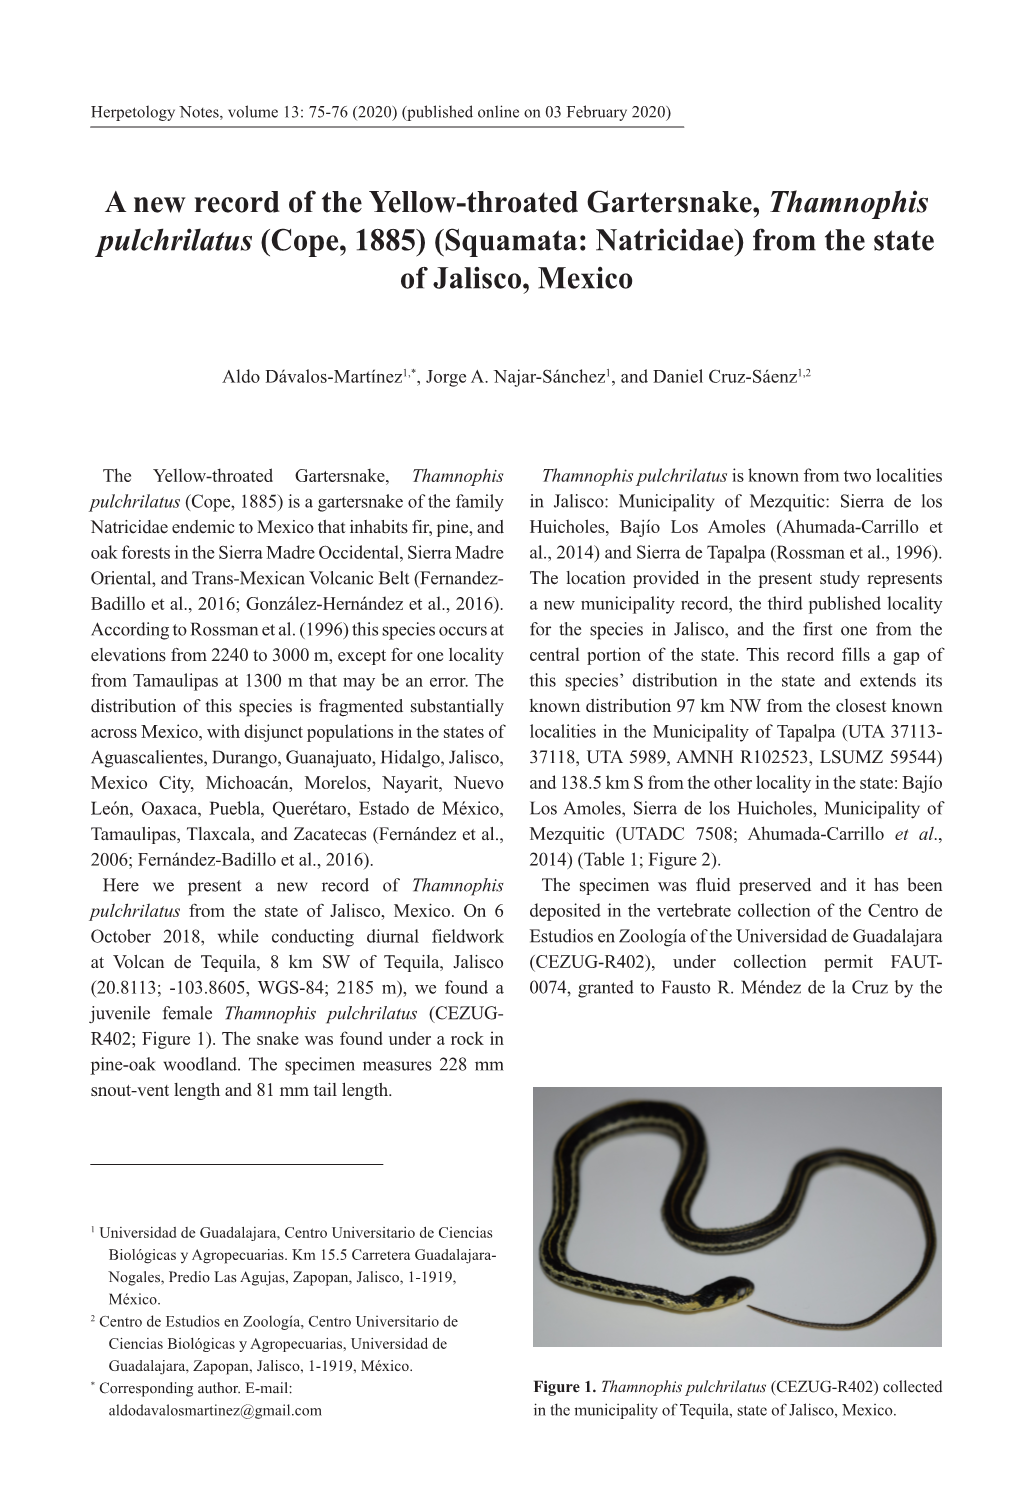 A New Record of the Yellow-Throated Gartersnake, Thamnophis Pulchrilatus (Cope, 1885) (Squamata: Natricidae) from the State of Jalisco, Mexico